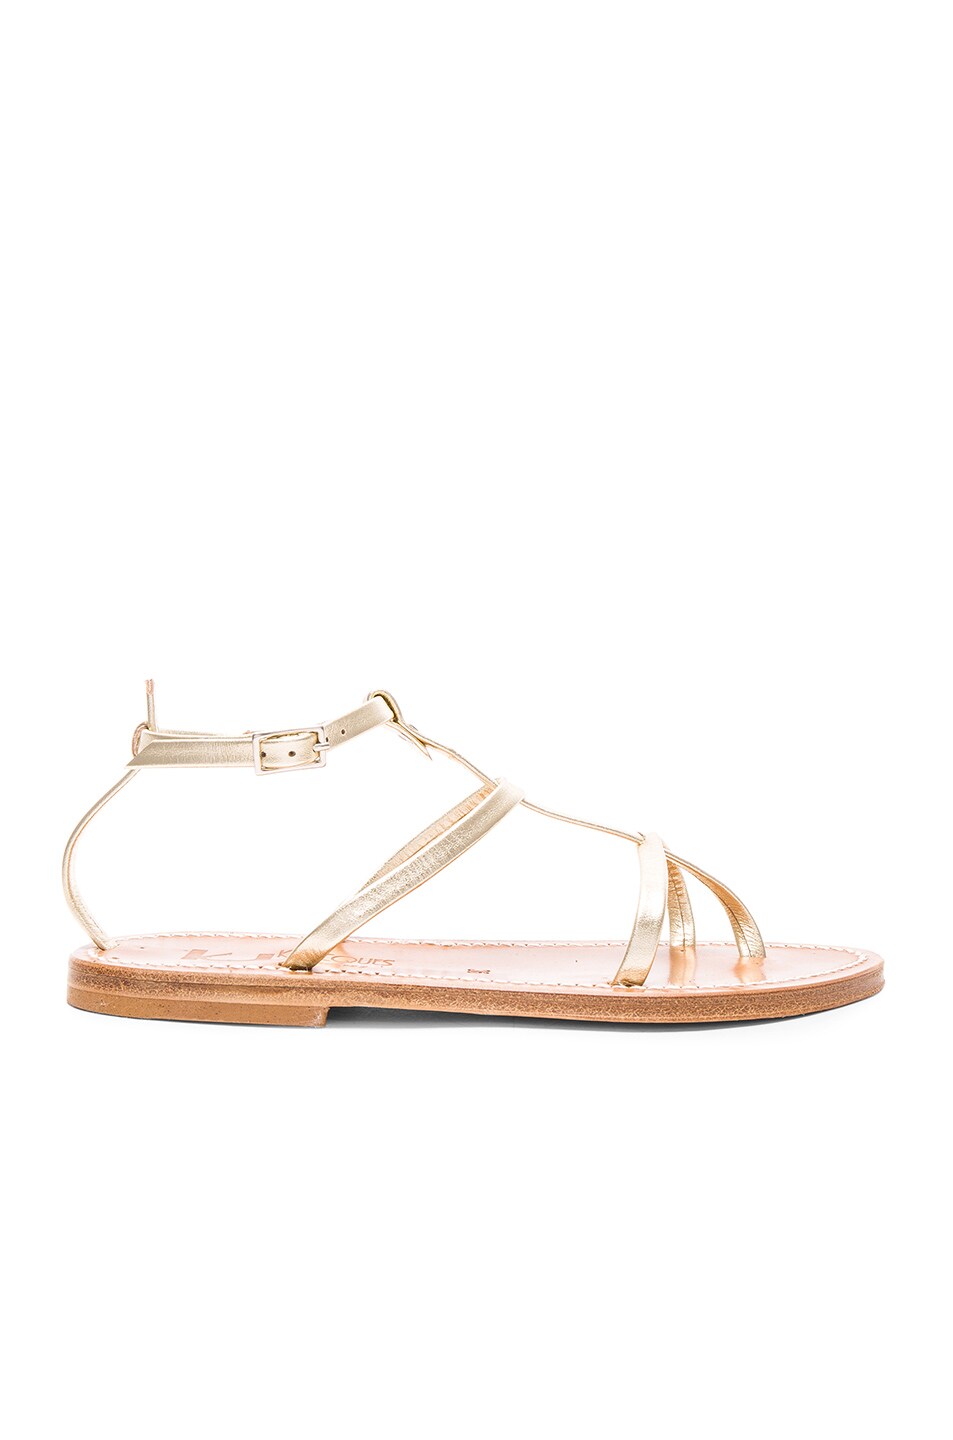 Image 1 of K Jacques Leather Gina Sandals in Lame Platine